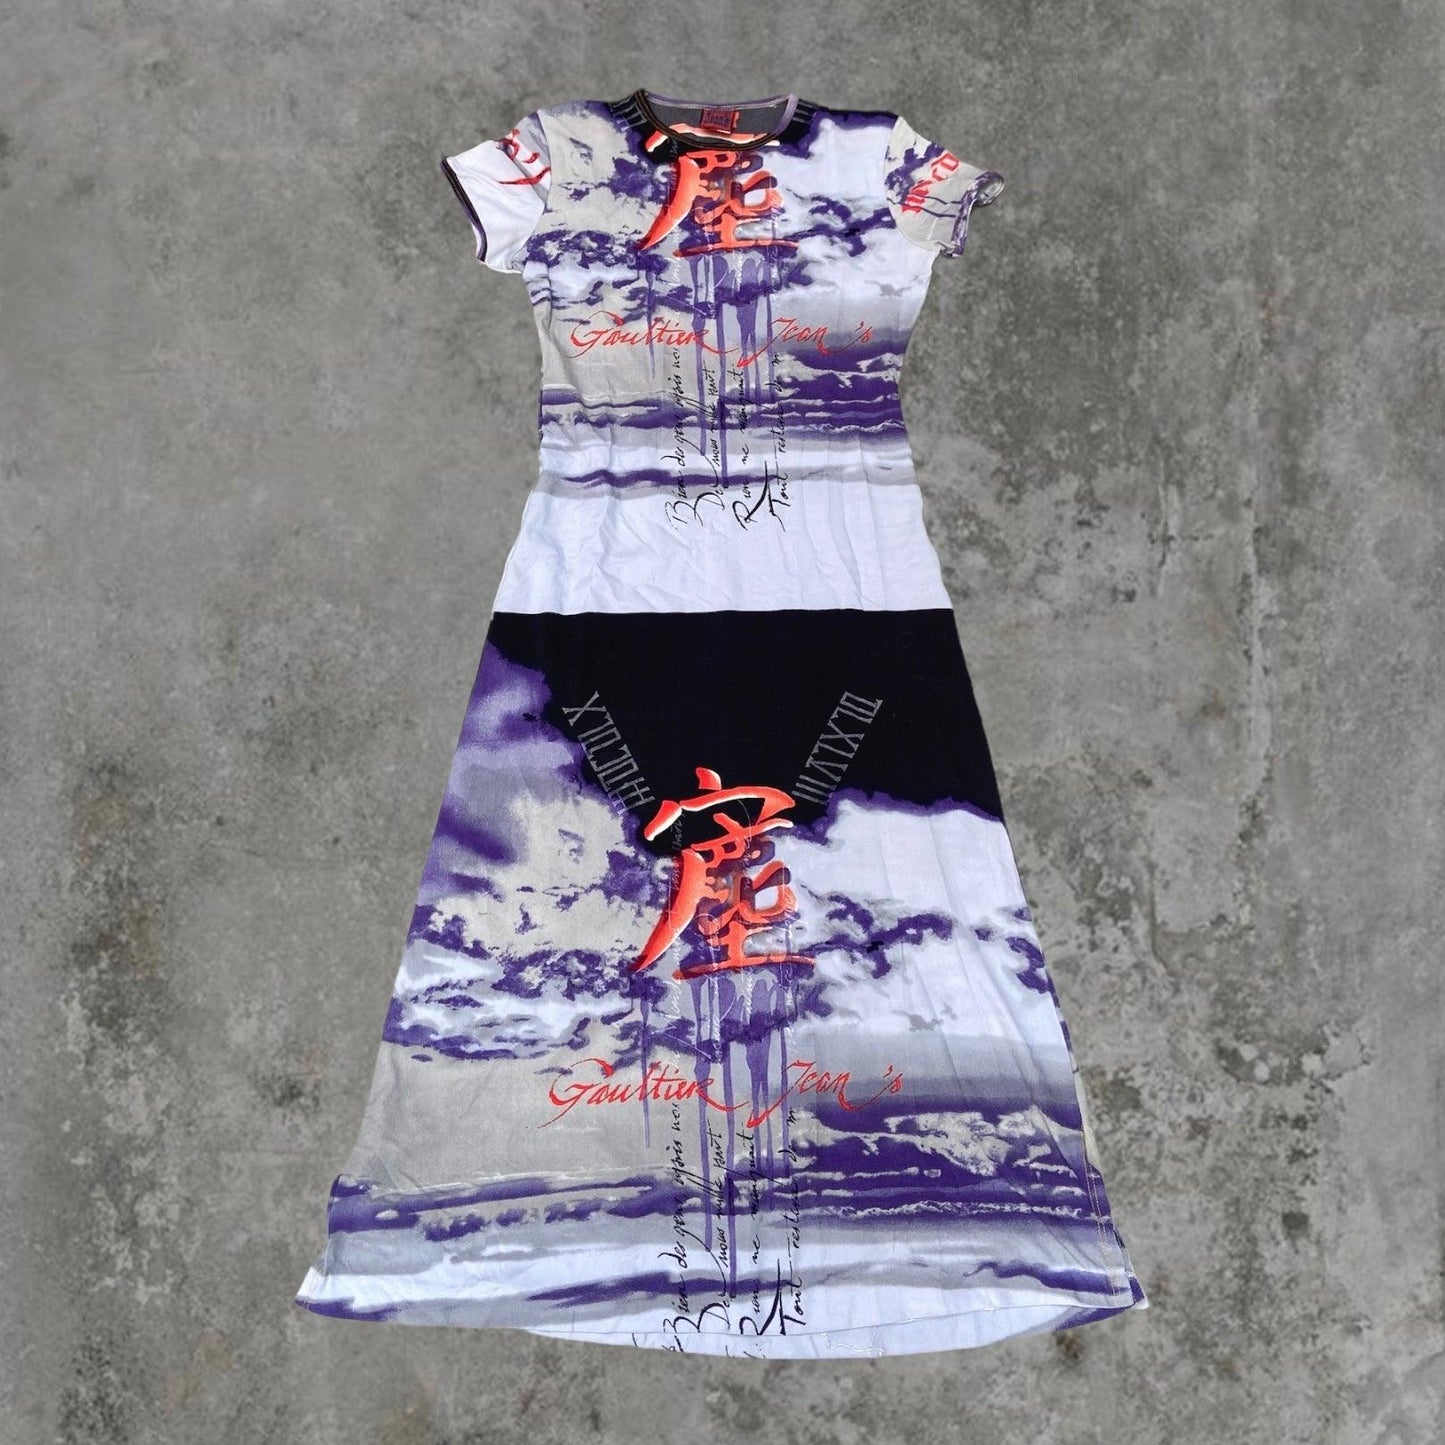 JEAN PAUL GAULTIER GRAPHIC PRINT STRETCH DRESS - S - Known Source